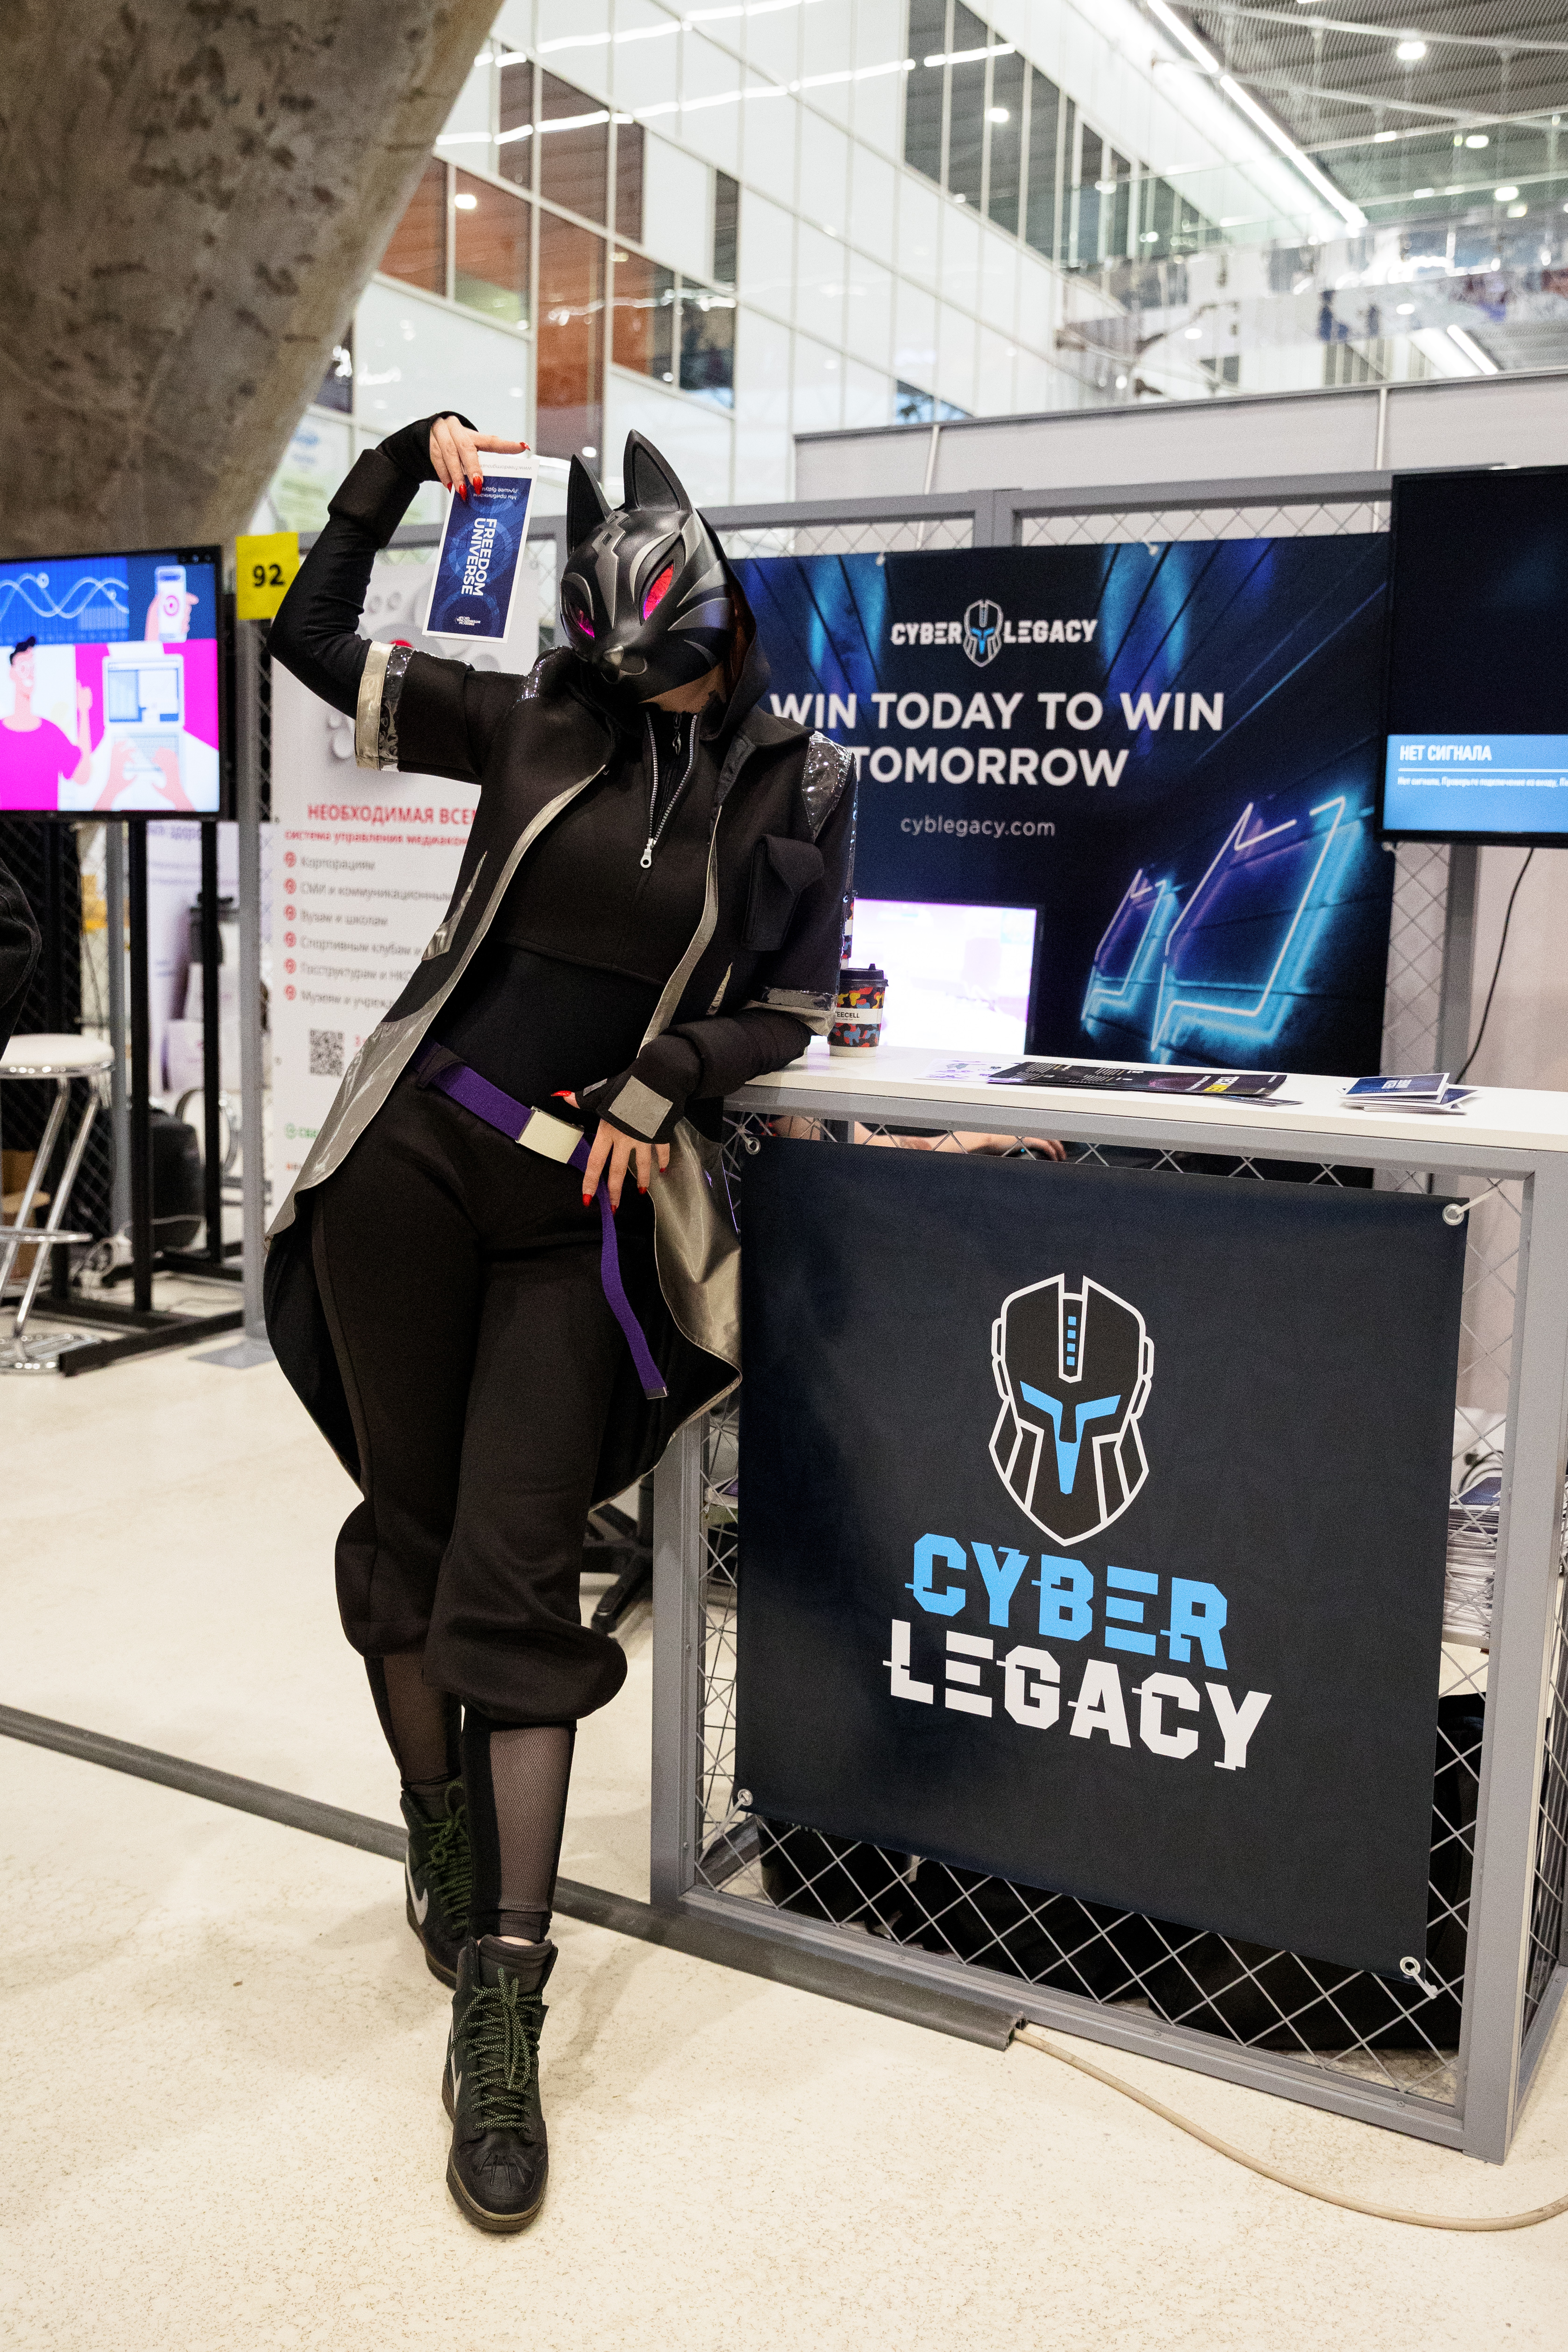 Cyber Legacy spoke about investing in Esports at Russian Tech Week 2021